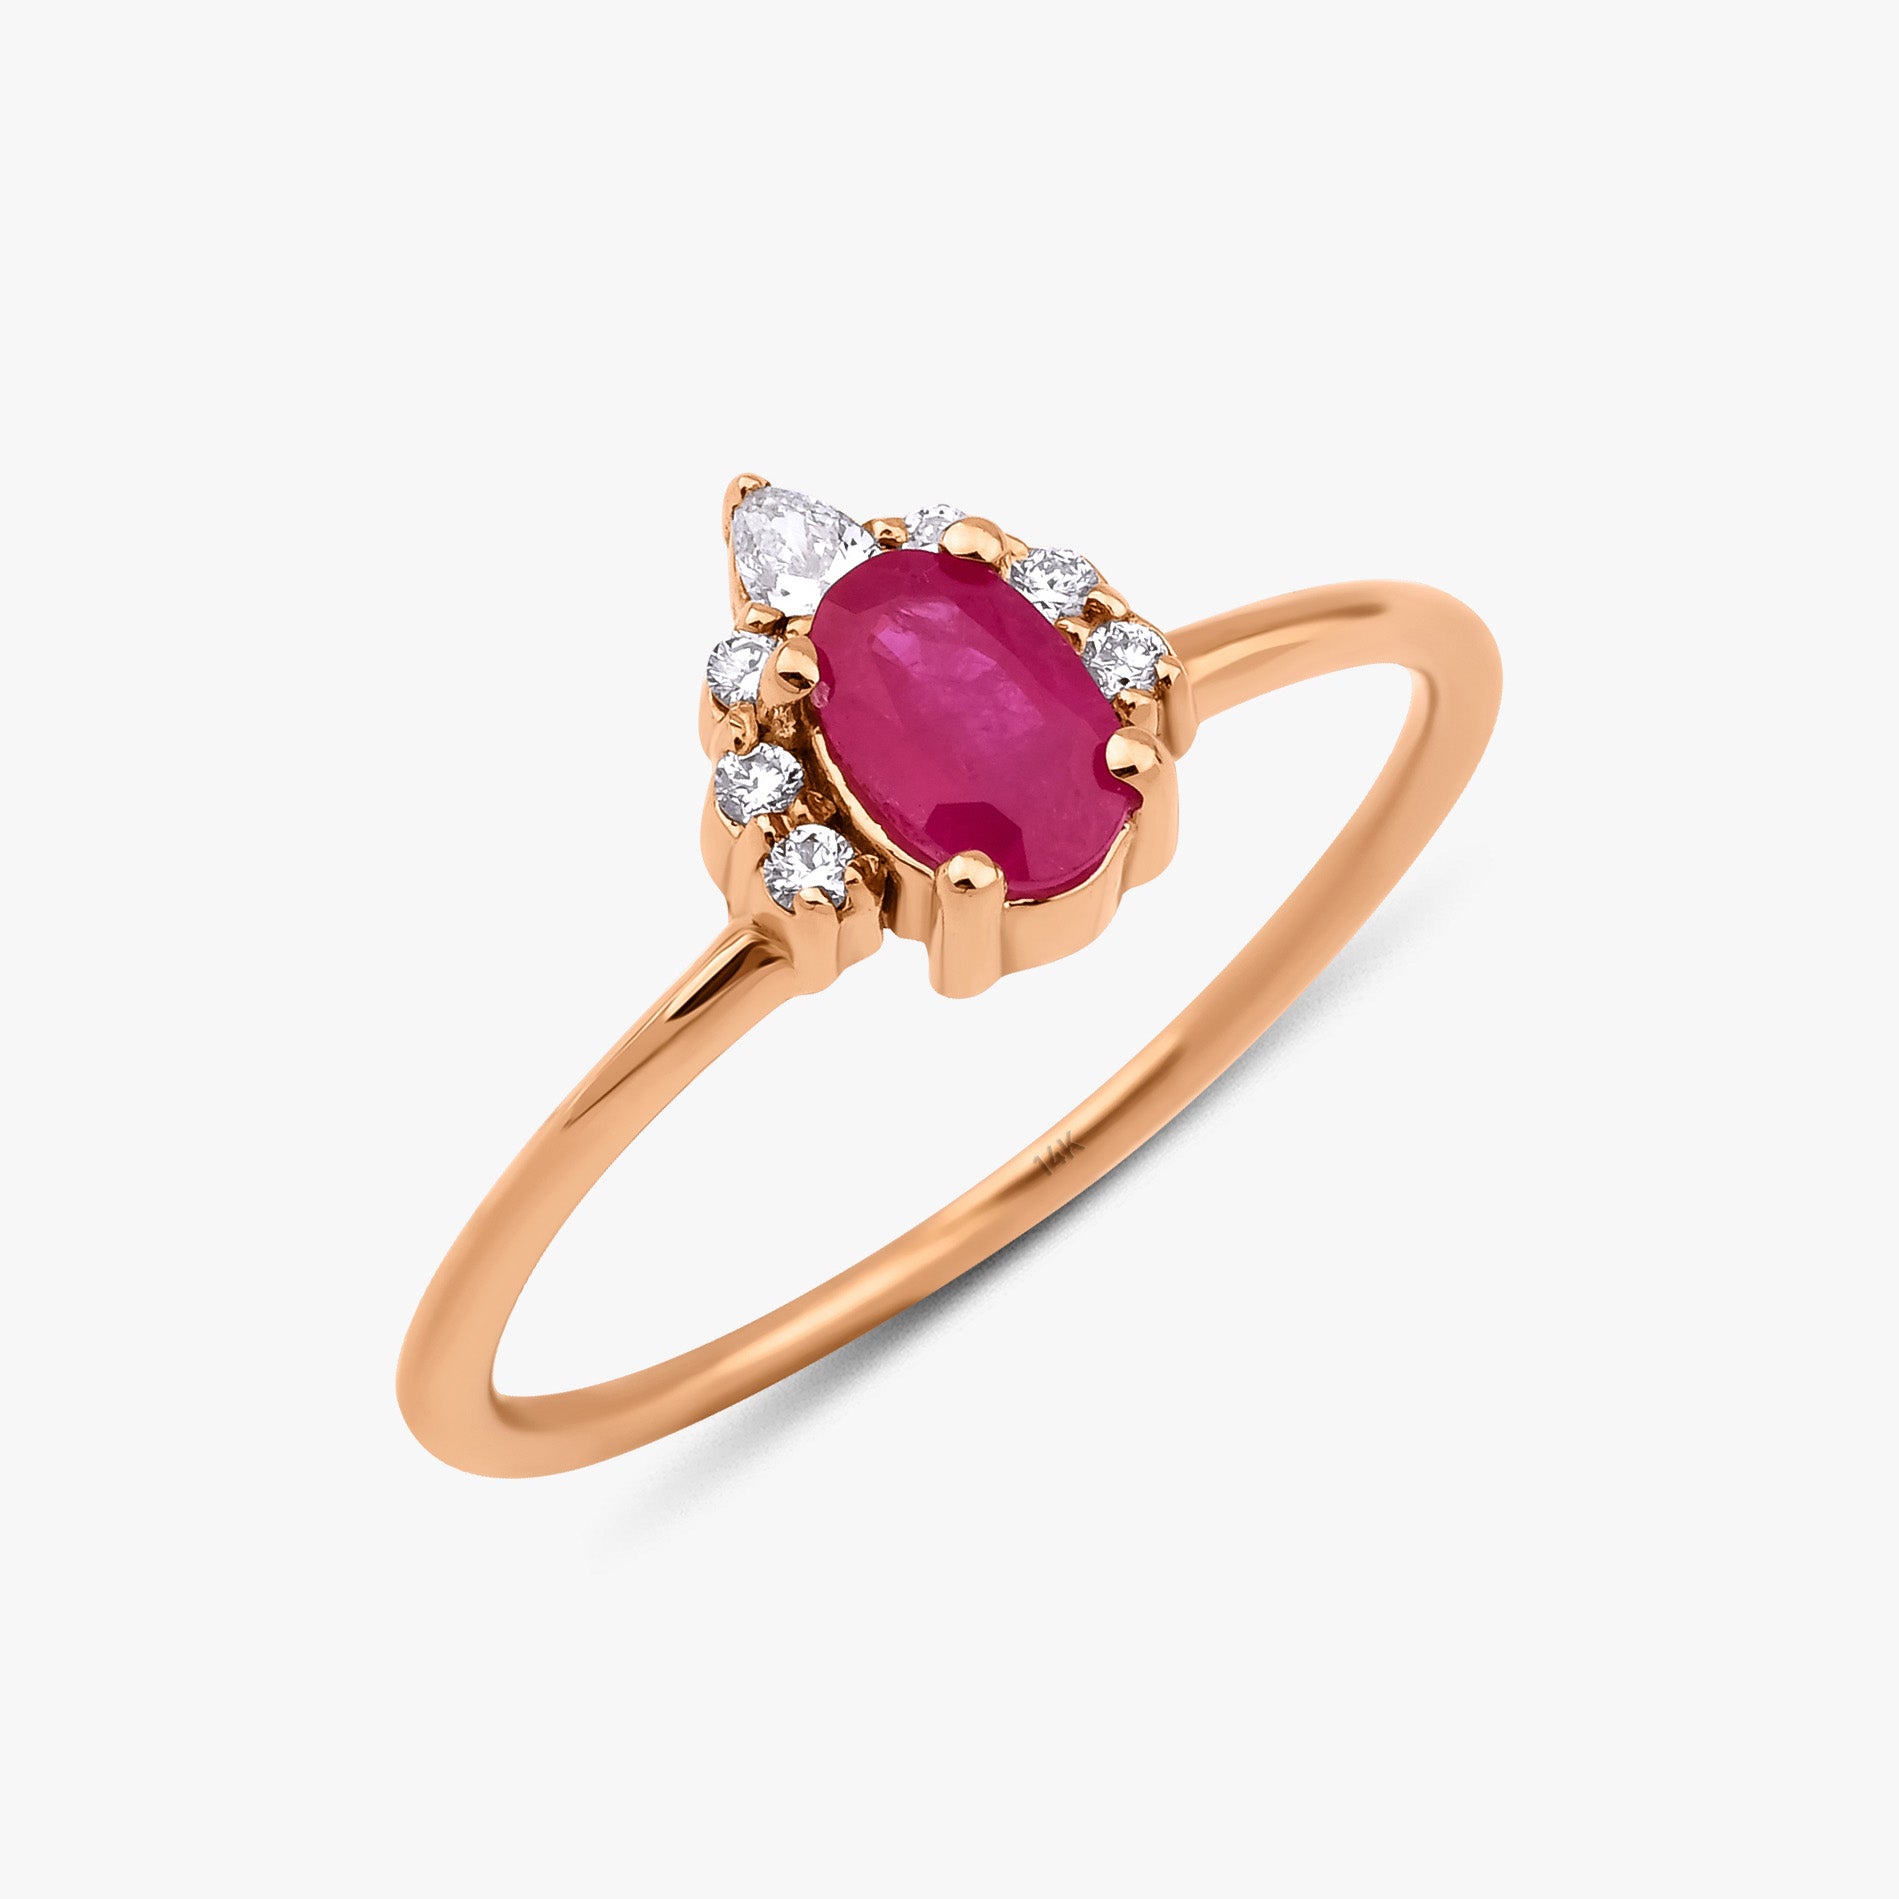 Oval Ruby and Diamond Ring in 14K Gold